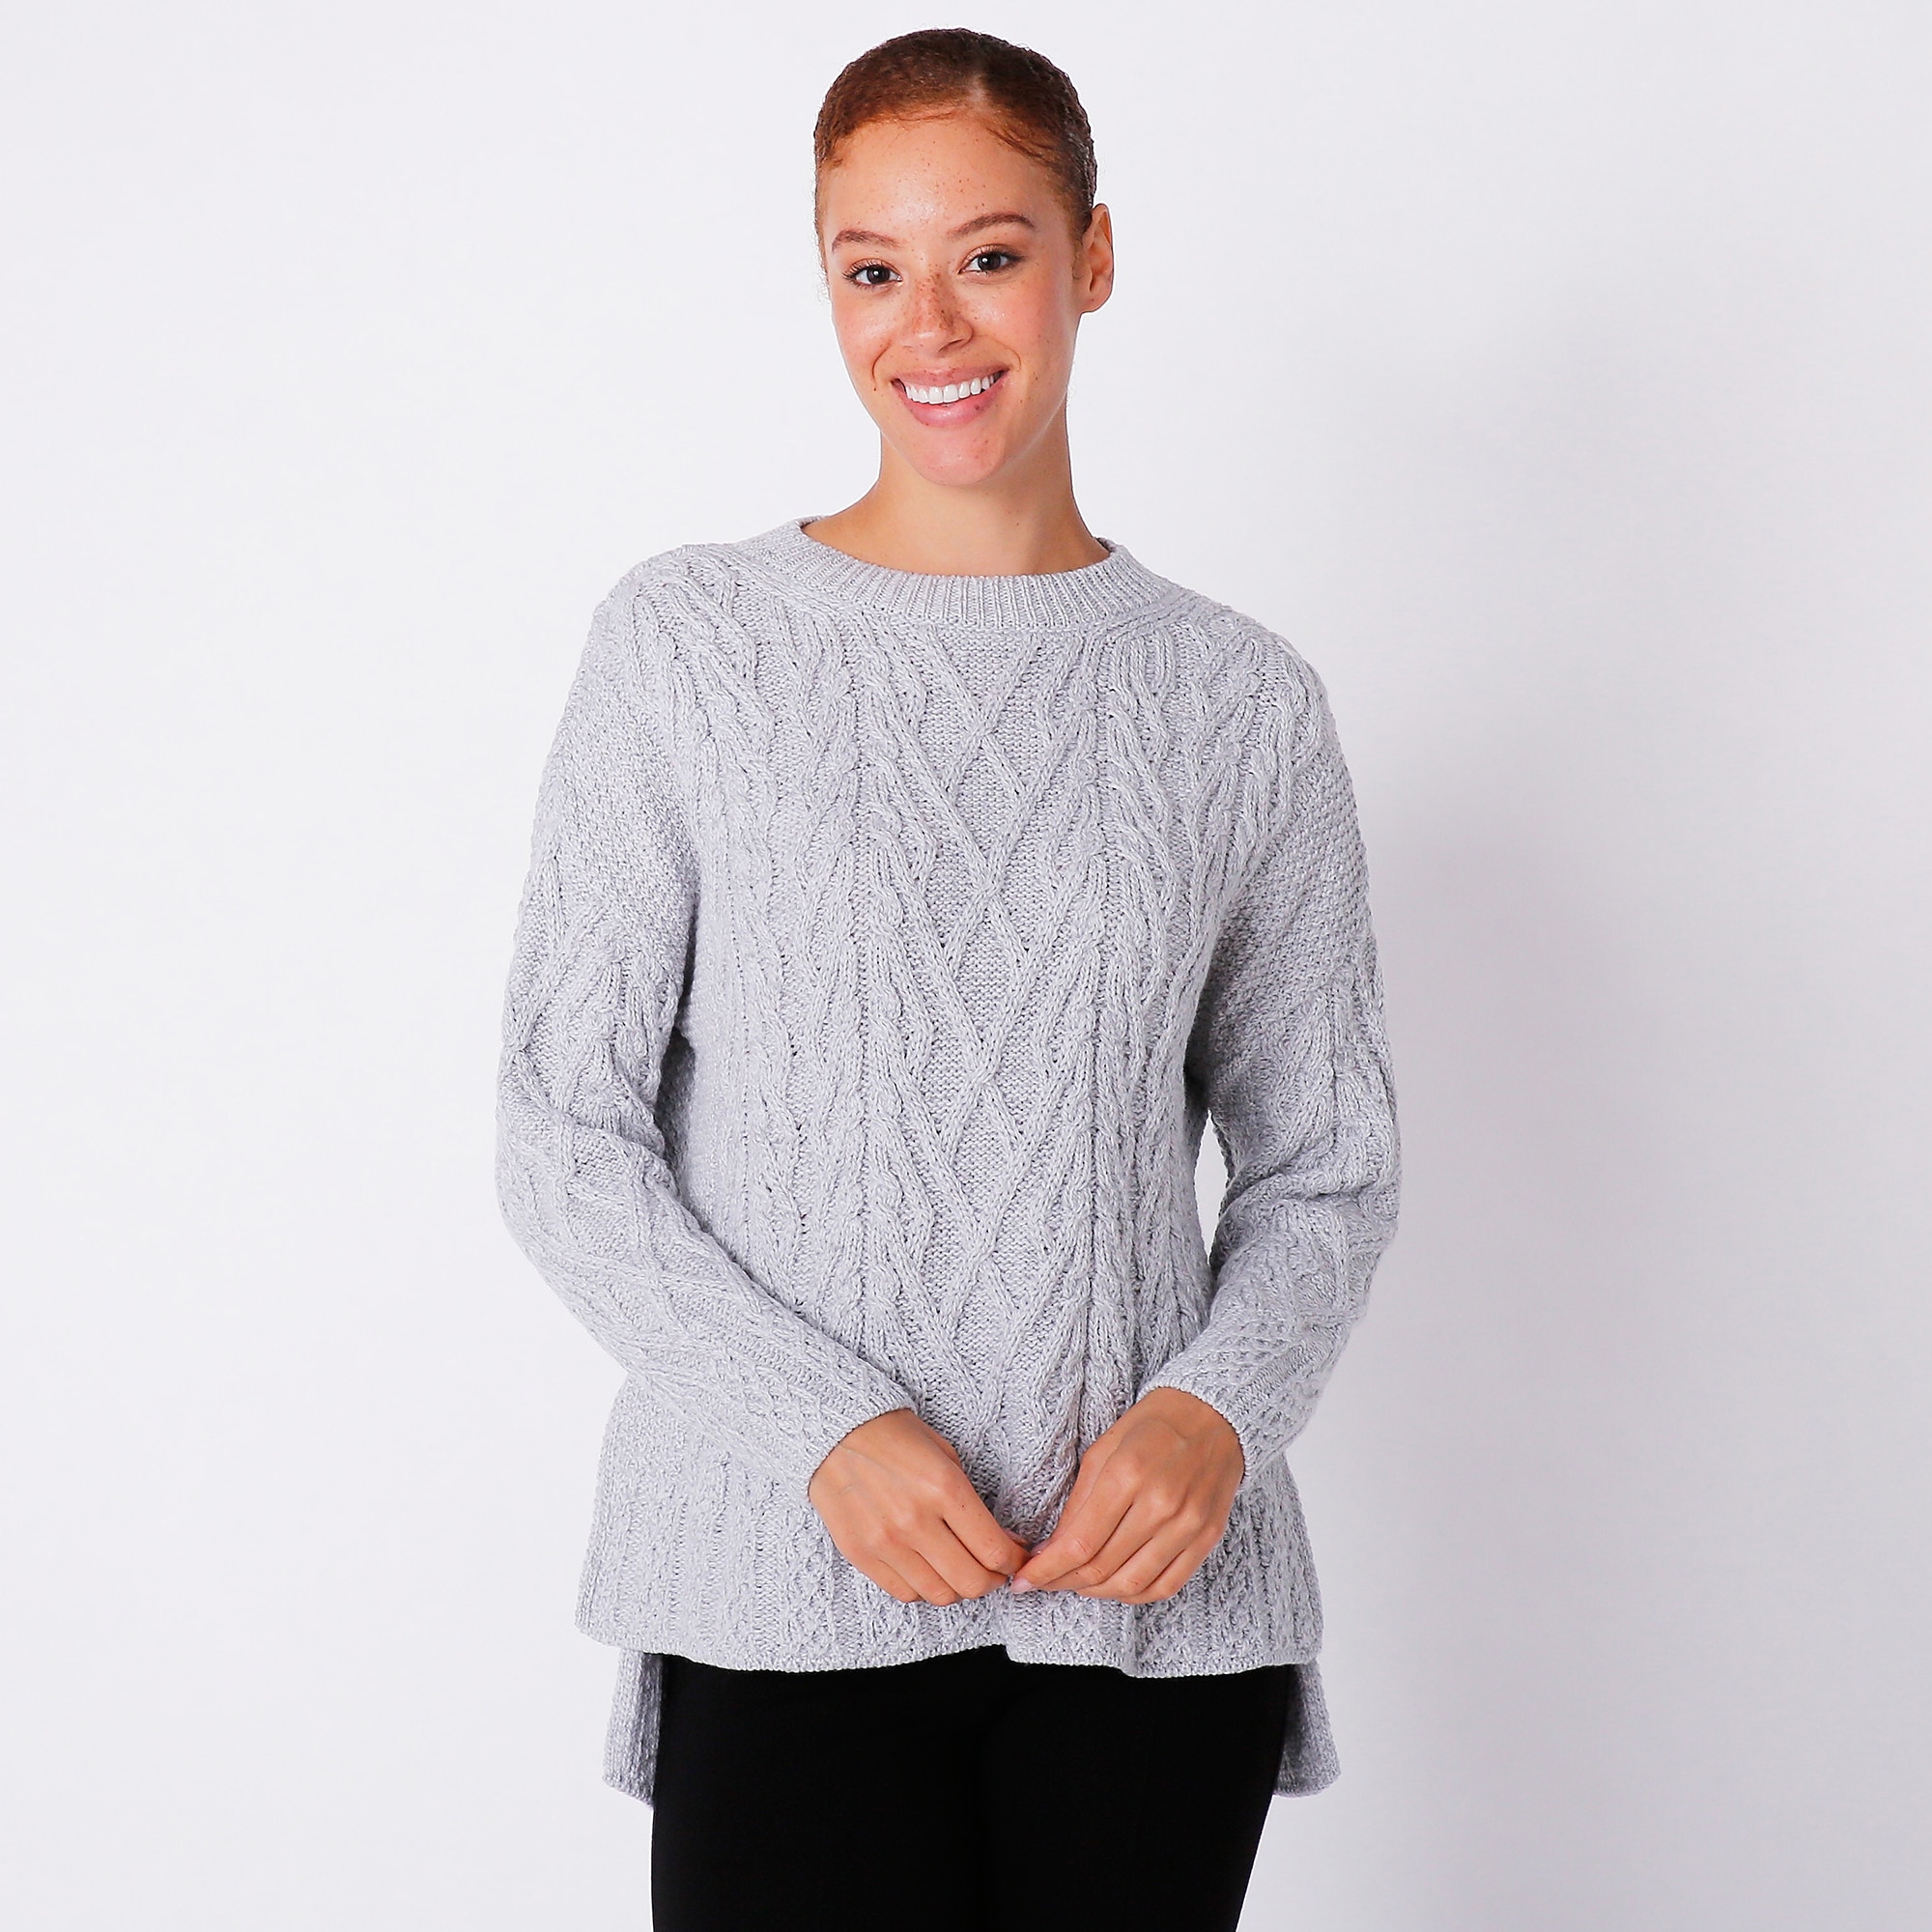 Clothing & Shoes - Tops - Sweaters & Cardigans - Pullovers - Aran